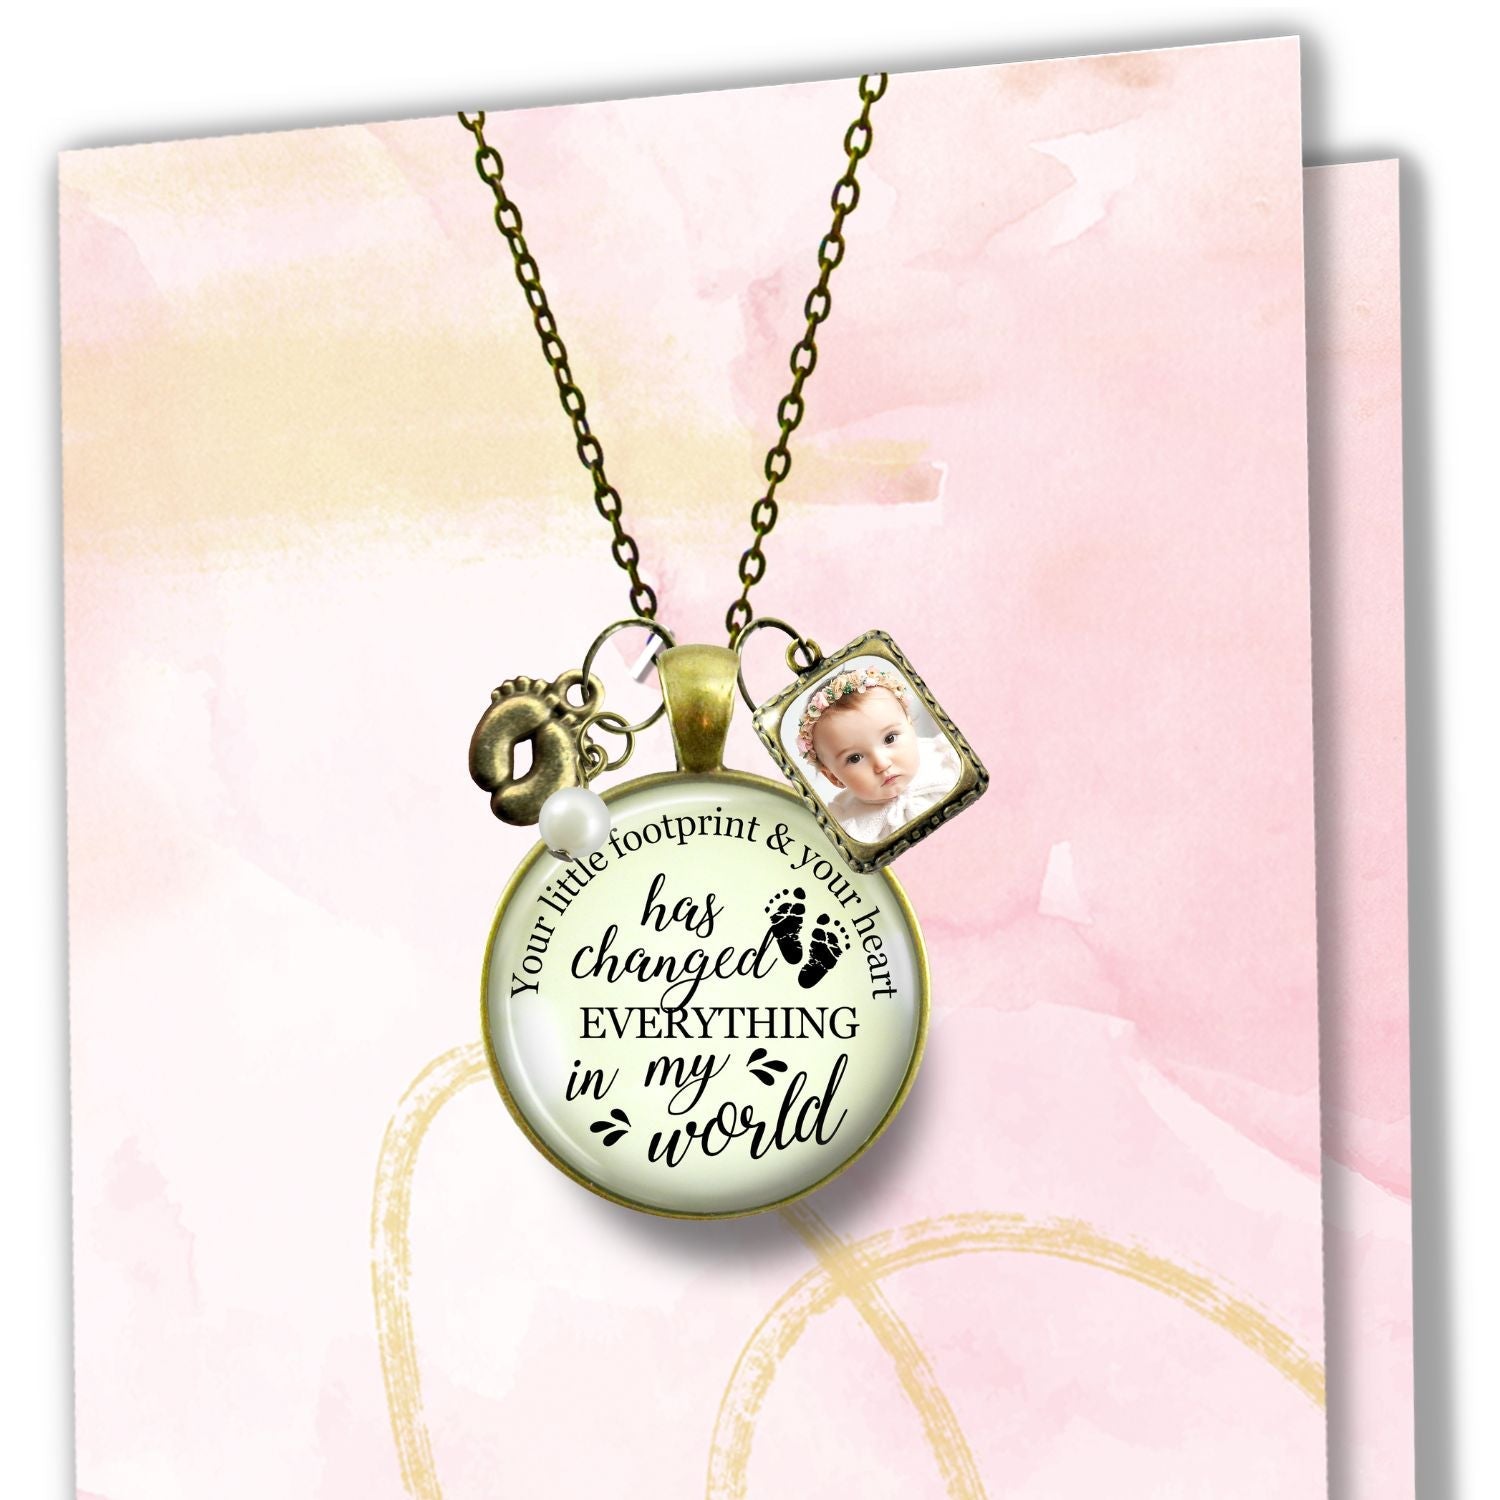 Handmade Gutsy Goodness Jewelry New Mom Necklace Your Little Footprint Gift Baby Feet & Photo Frame Charm, DIY Picture